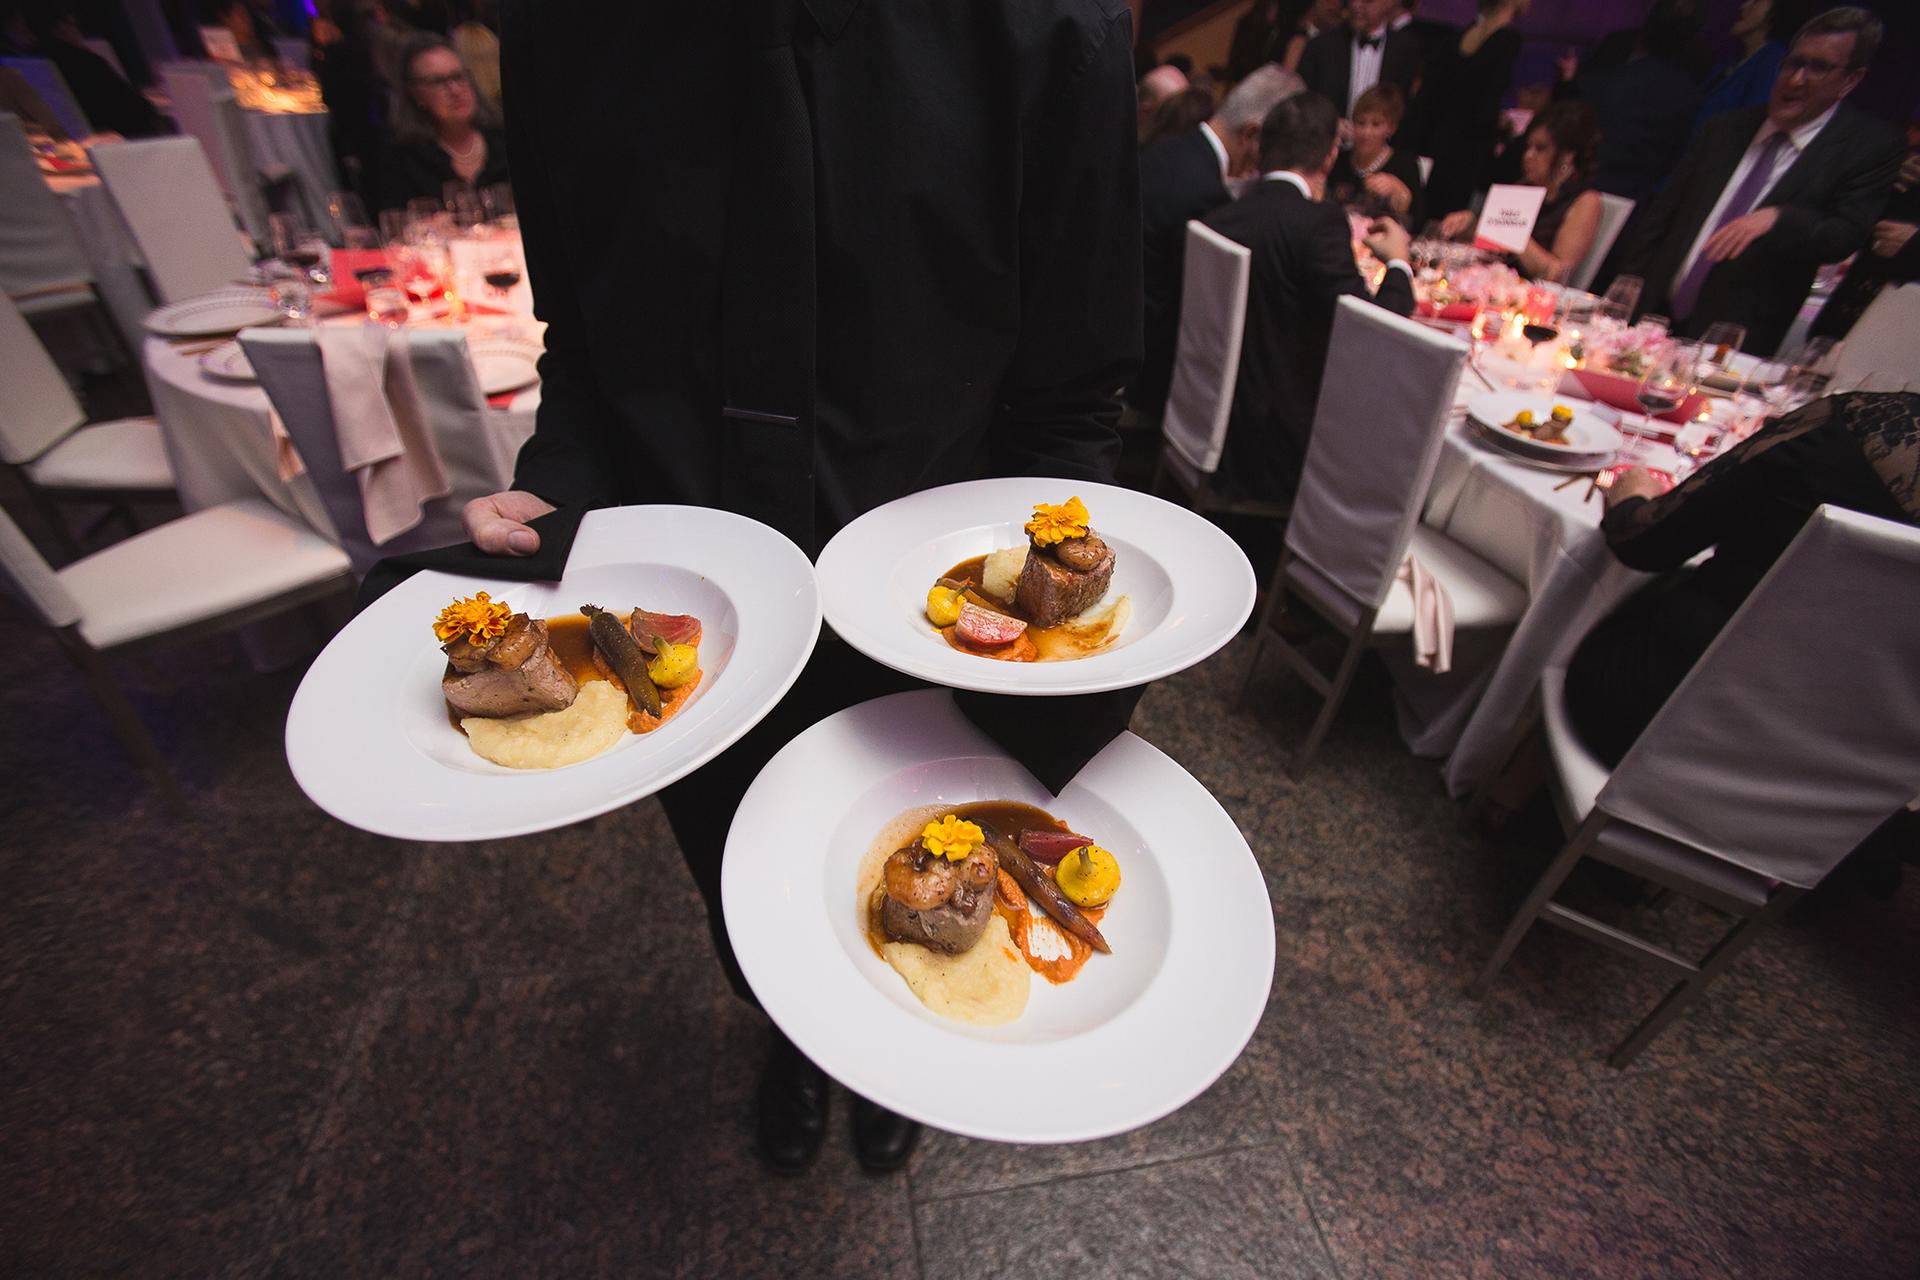 Gala four-course banquet presented with military precision and white-gloved, French service